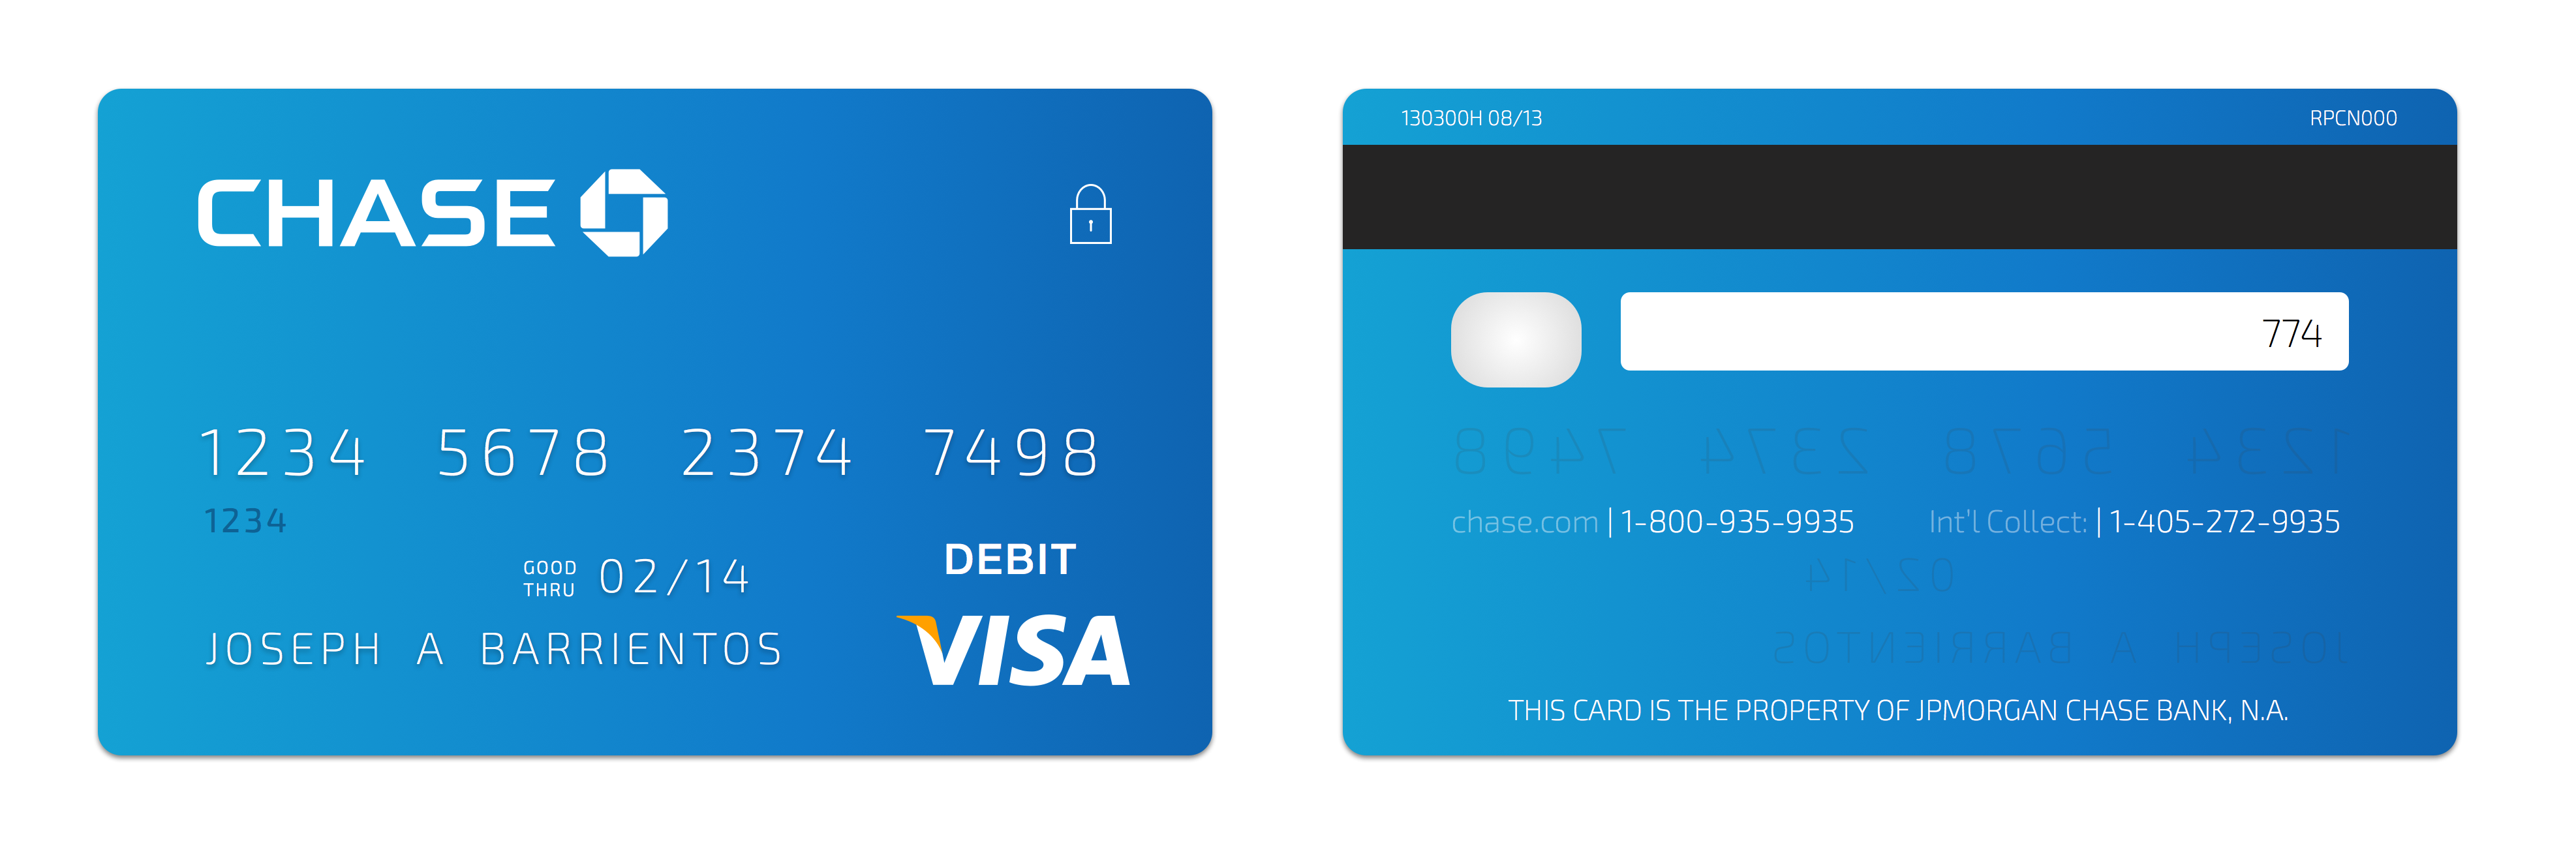 can you buy crypto with chase debit card